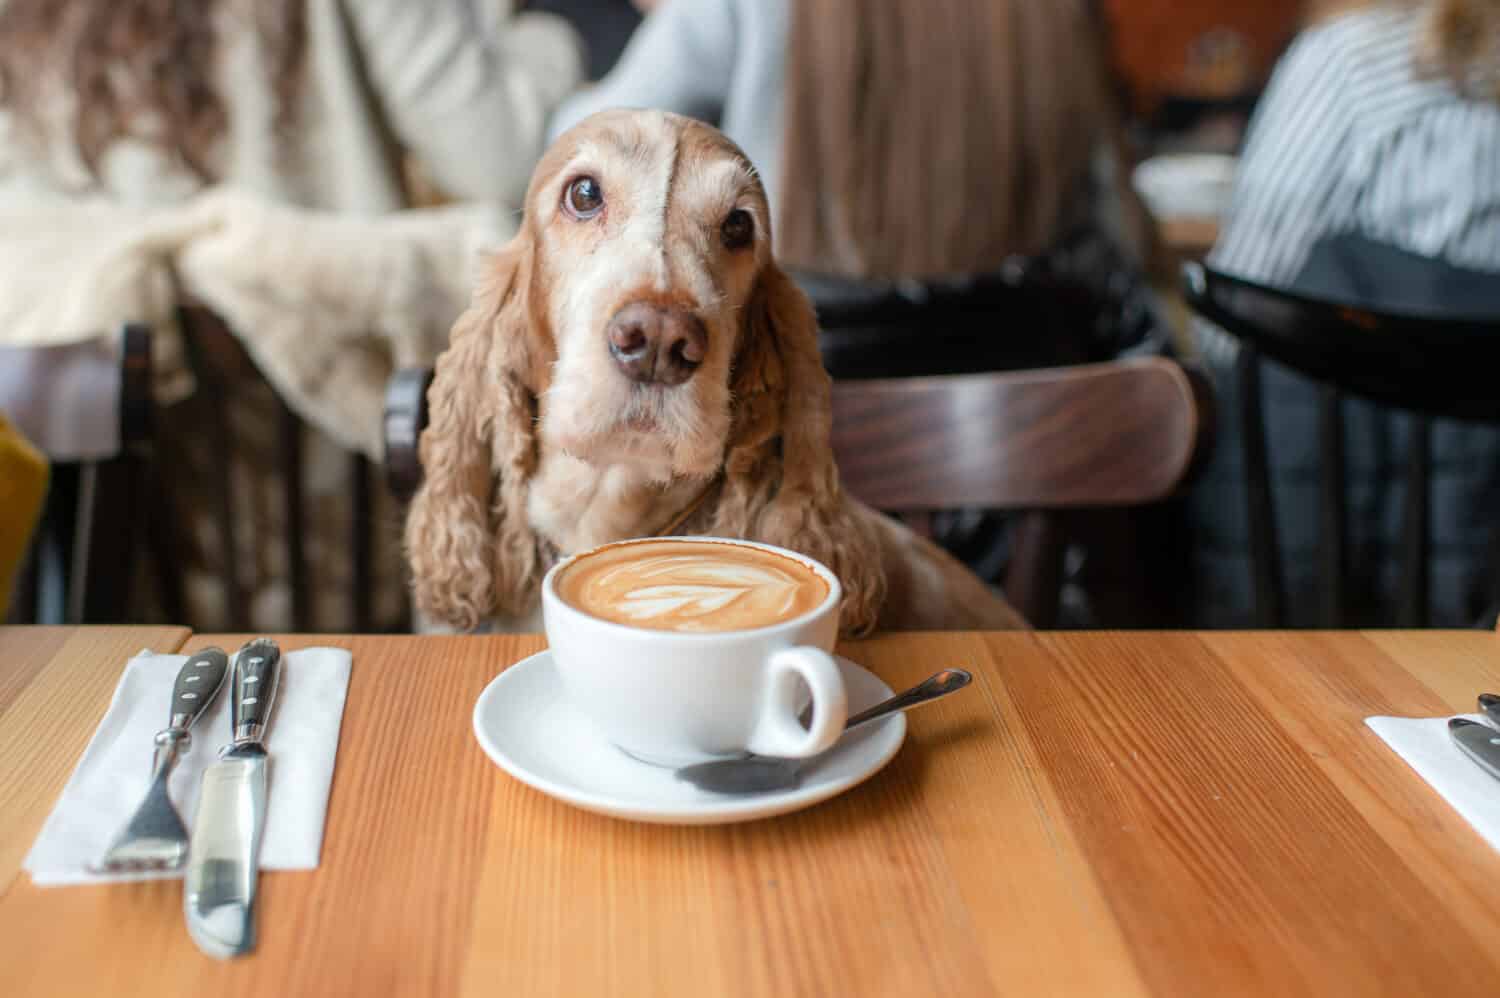 Portrait of a senior Cocker Spaniel dog sitting in caffe with a cup of cappuccino on the table.